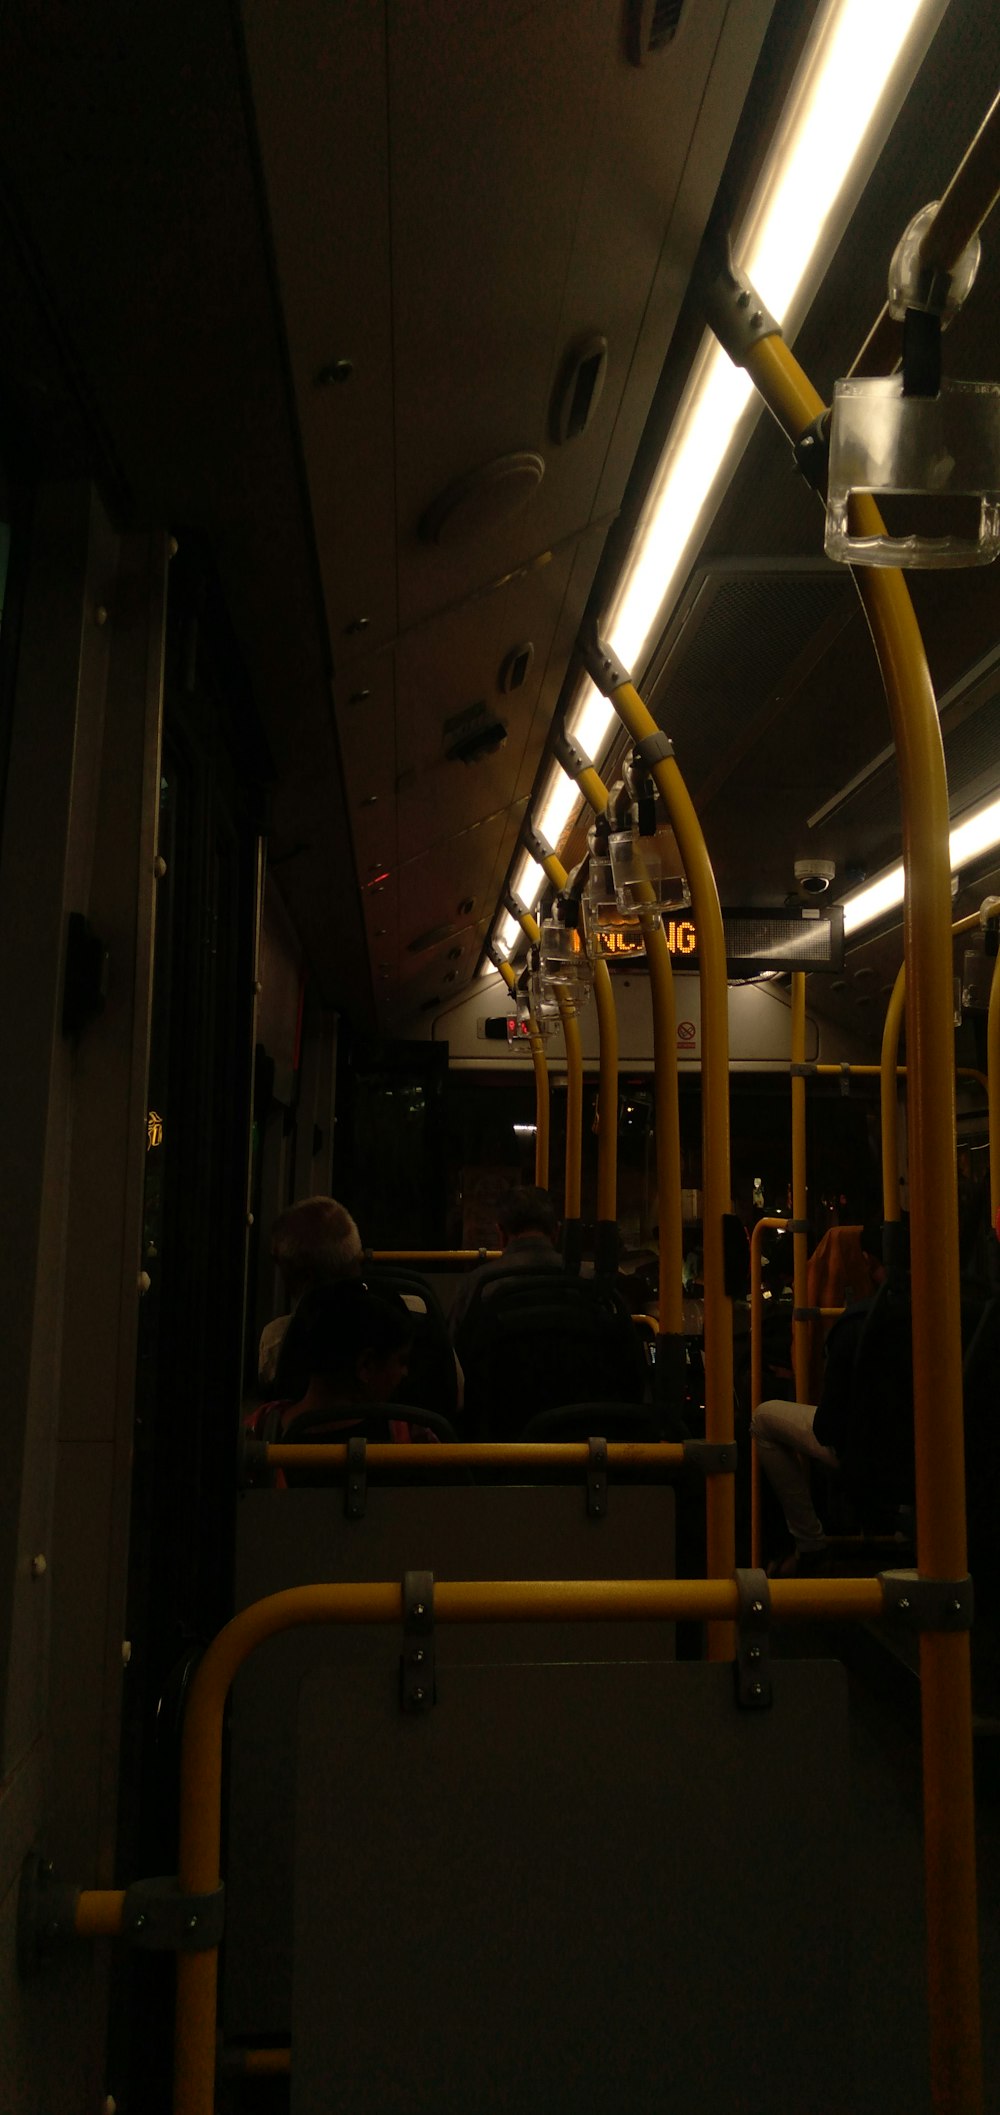 the inside of a public transit bus at night